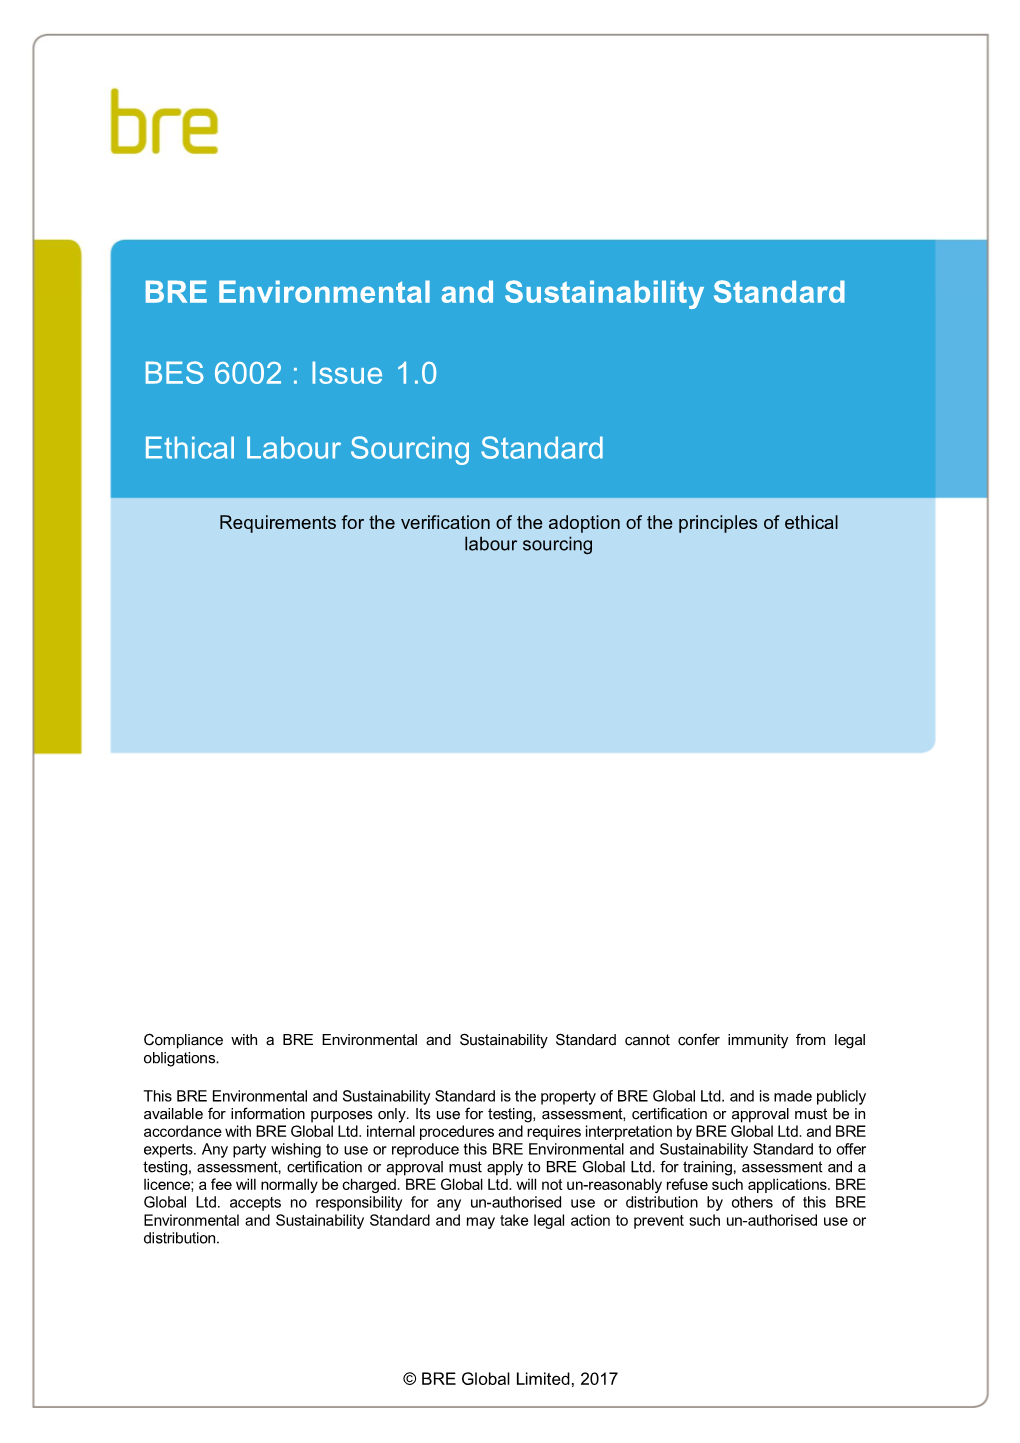 BRE Environmental and Sustainability Standard BES 6002 : Issue 1.0